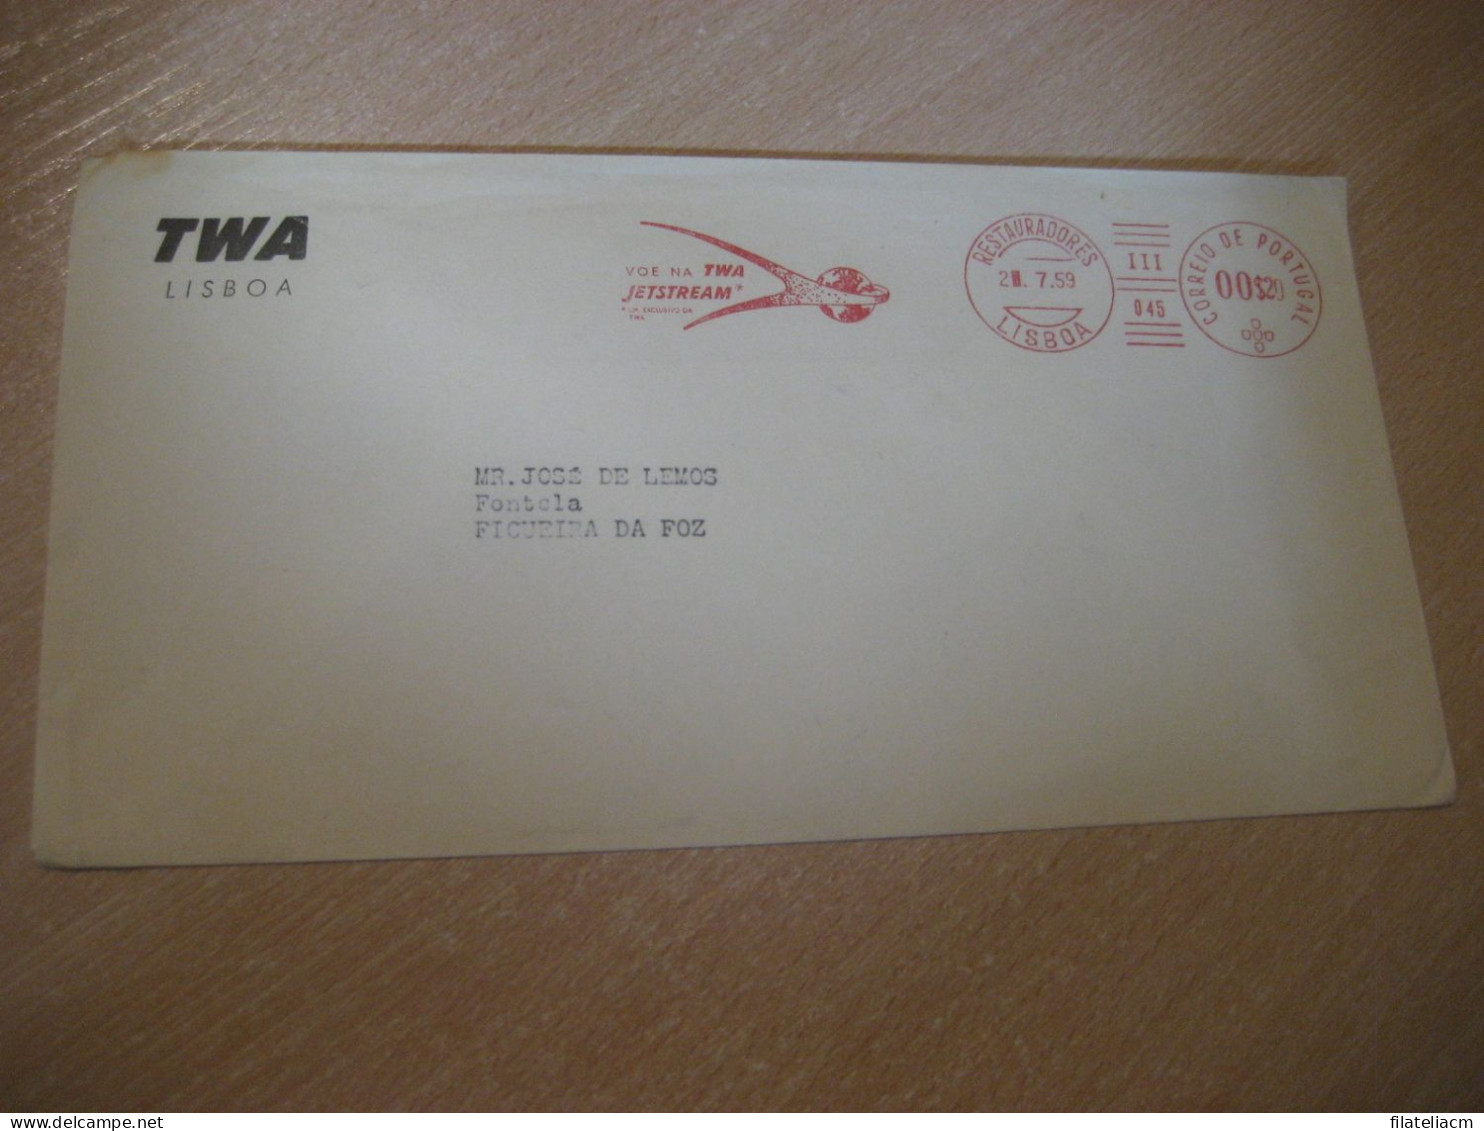 LISBOA 1959 To Figueira Da Foz TWA Jetstream Airline Trans World Airlines Flight Meter Mail Cancel Cover PORTUGAL - Covers & Documents